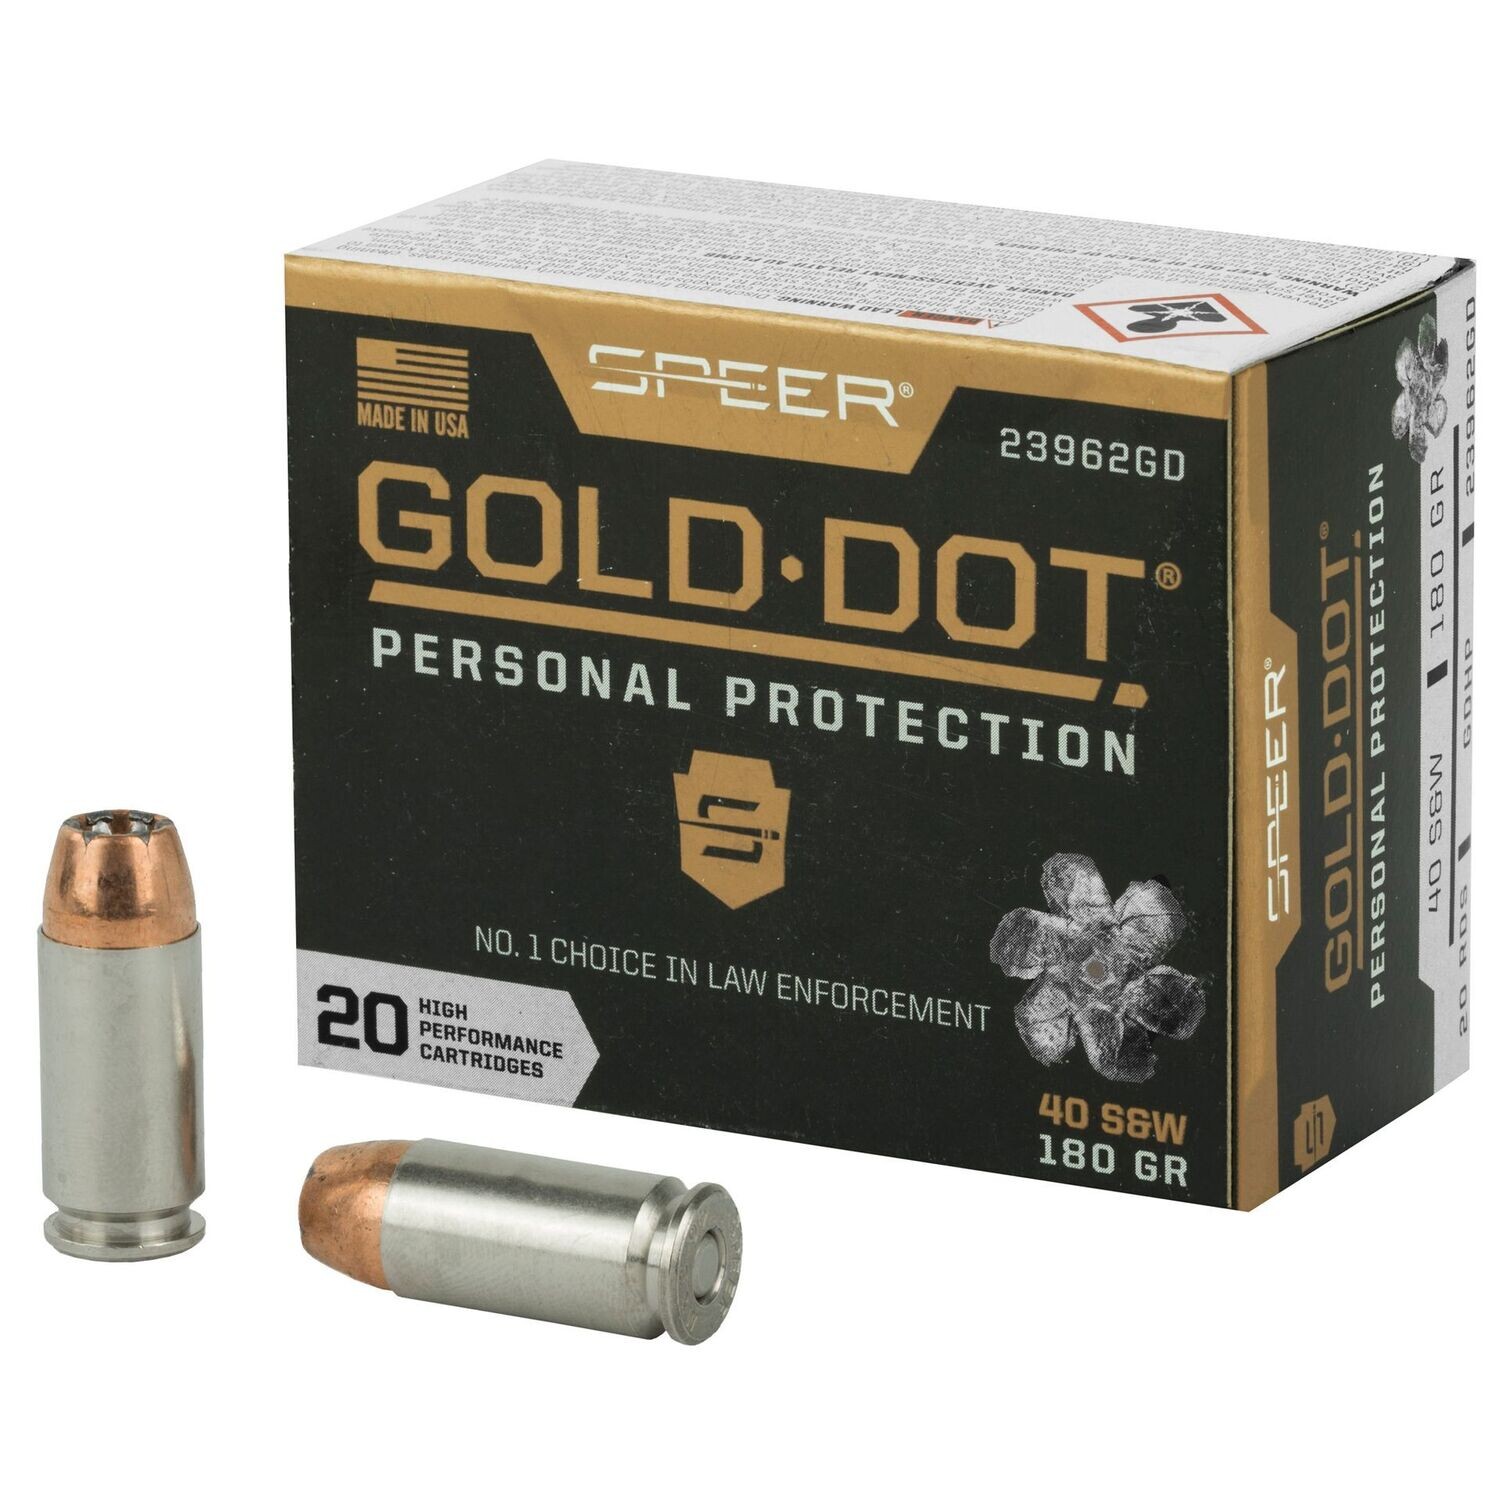 Speer Ammunition, Speer Gold Dot, Personal Protection, 40S&W, 180 Grain, Hollow Point, 20 Round Box